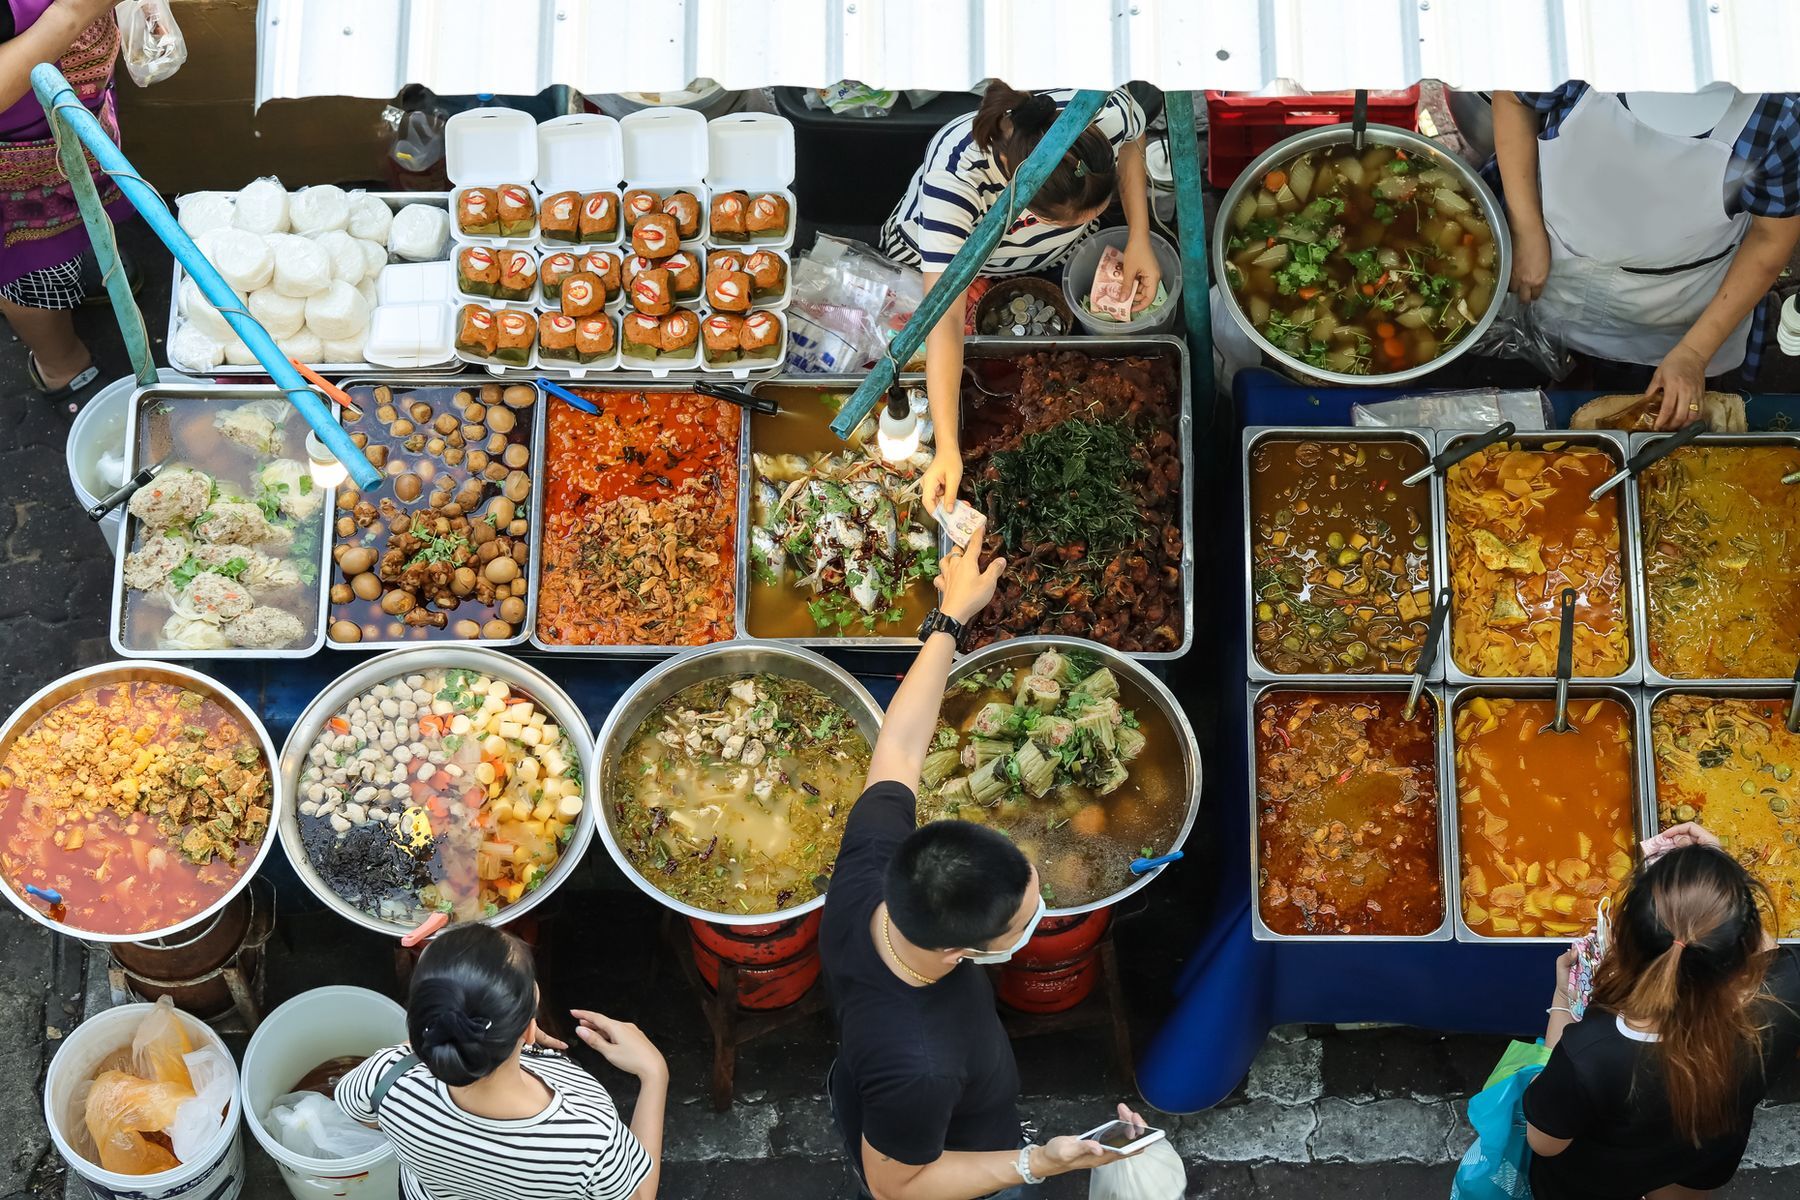 <p>Monthly minimum: $248</p><p>Bangkok’s Chinatown District (known to locals as Yaowarat) is considered the birthplace of street food, with more than <a href="https://www.bangkokpost.com/thailand/general/1582794/street-vendor-rules-in-bangkok-hurting-tourism" title="https://www.bangkokpost.com/thailand/general/1582794/street-vendor-rules-in-bangkok-hurting-tourism#:~:text=It%20is%20estimated%20that%20there,for%20Labour%20and%20Employment%20Promotion.">110,000 food vendors</a> today. As such, the city has a rich history of providing delicious food at affordable prices, and that includes groceries.</p>